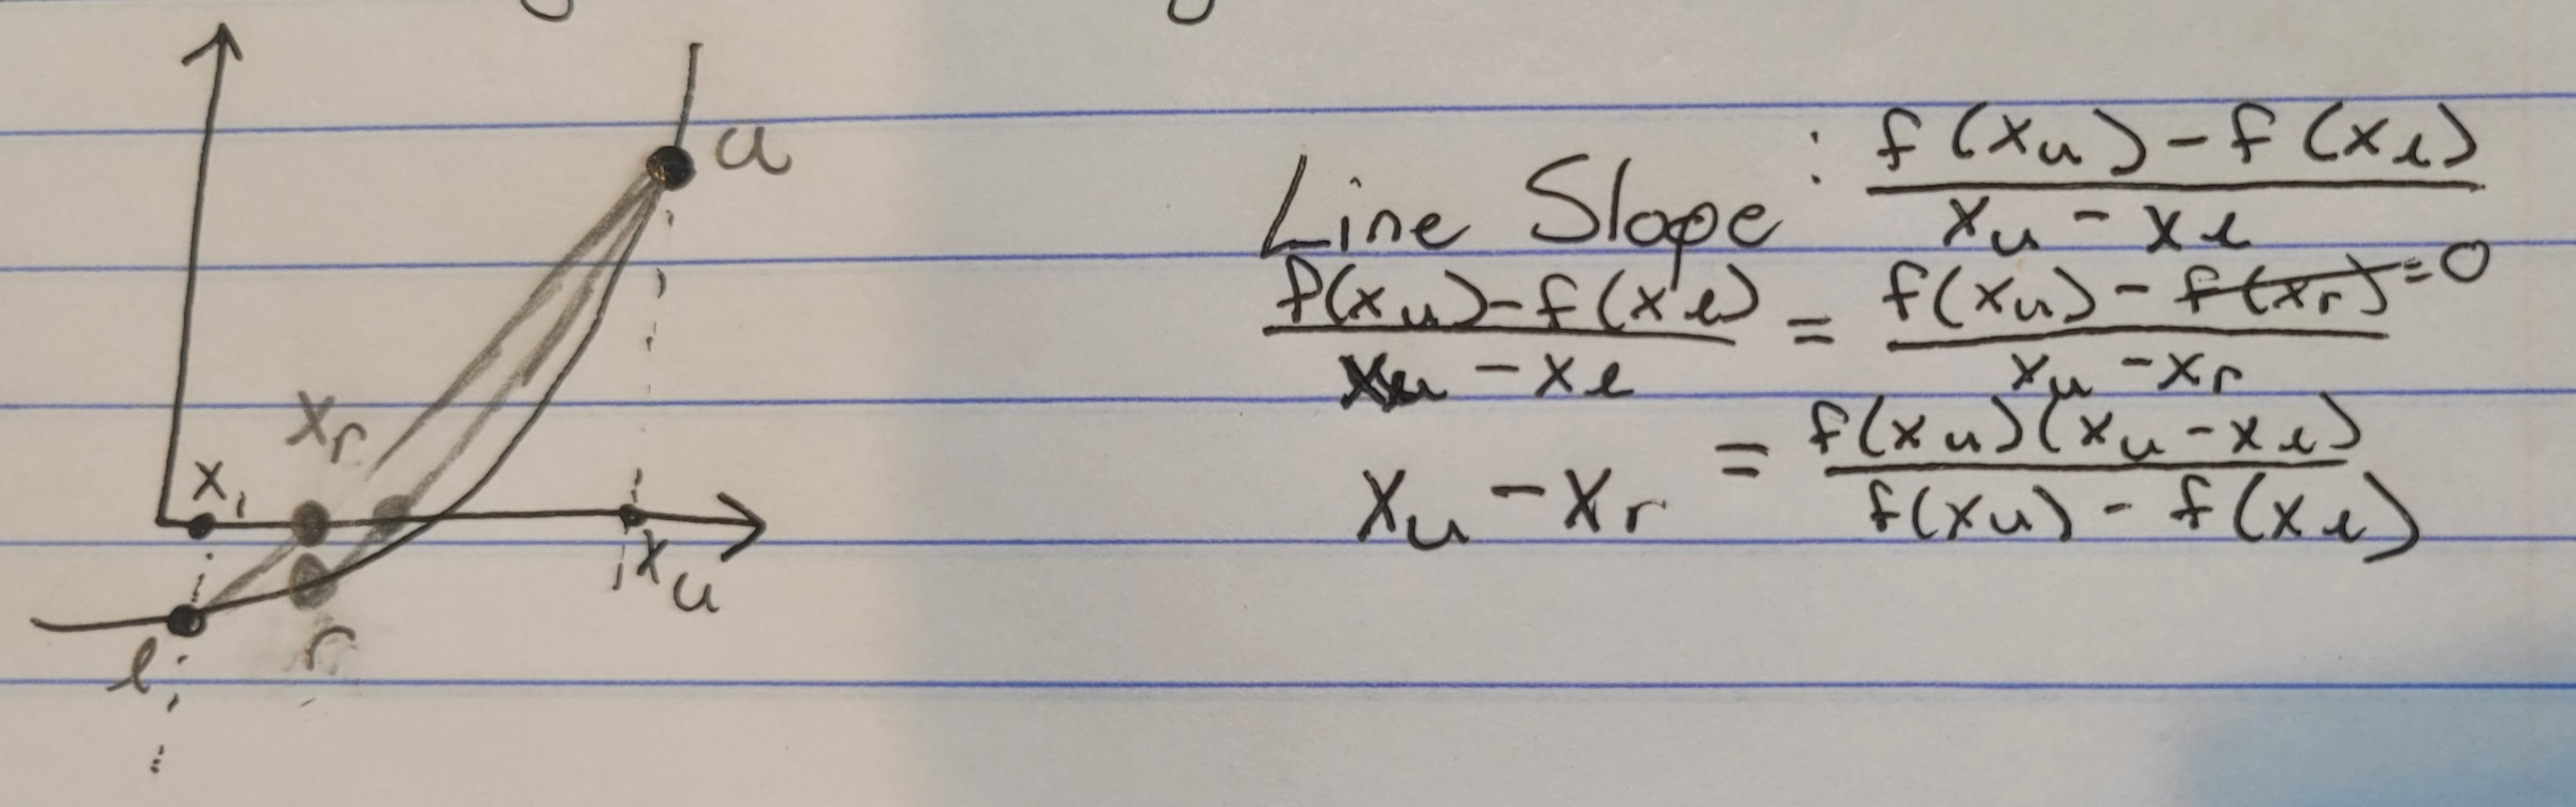 <ul><li><p>Linear interpolation, root finding</p></li><li><p>Joins F(xl) and F(xu), intersection of line with x-axis = root estimate</p></li><li><p>Slope = [ F(xu) - F(xl) ] / [ xu - xl ] =&gt;&nbsp; [ F(xr) - F(xl) ] / [ xr- xl ]&nbsp; or xl -&gt; xr</p><ul><li><p>xu-xr = [ F(xu)*(xu-xl) ] / [ F(xu) - F(xl) ]</p></li></ul></li><li><p>Issues: multiple roots, one fixed point, poor convergence for high curvature</p></li><li><p>faster than other bracketing methods, robust</p></li></ul>